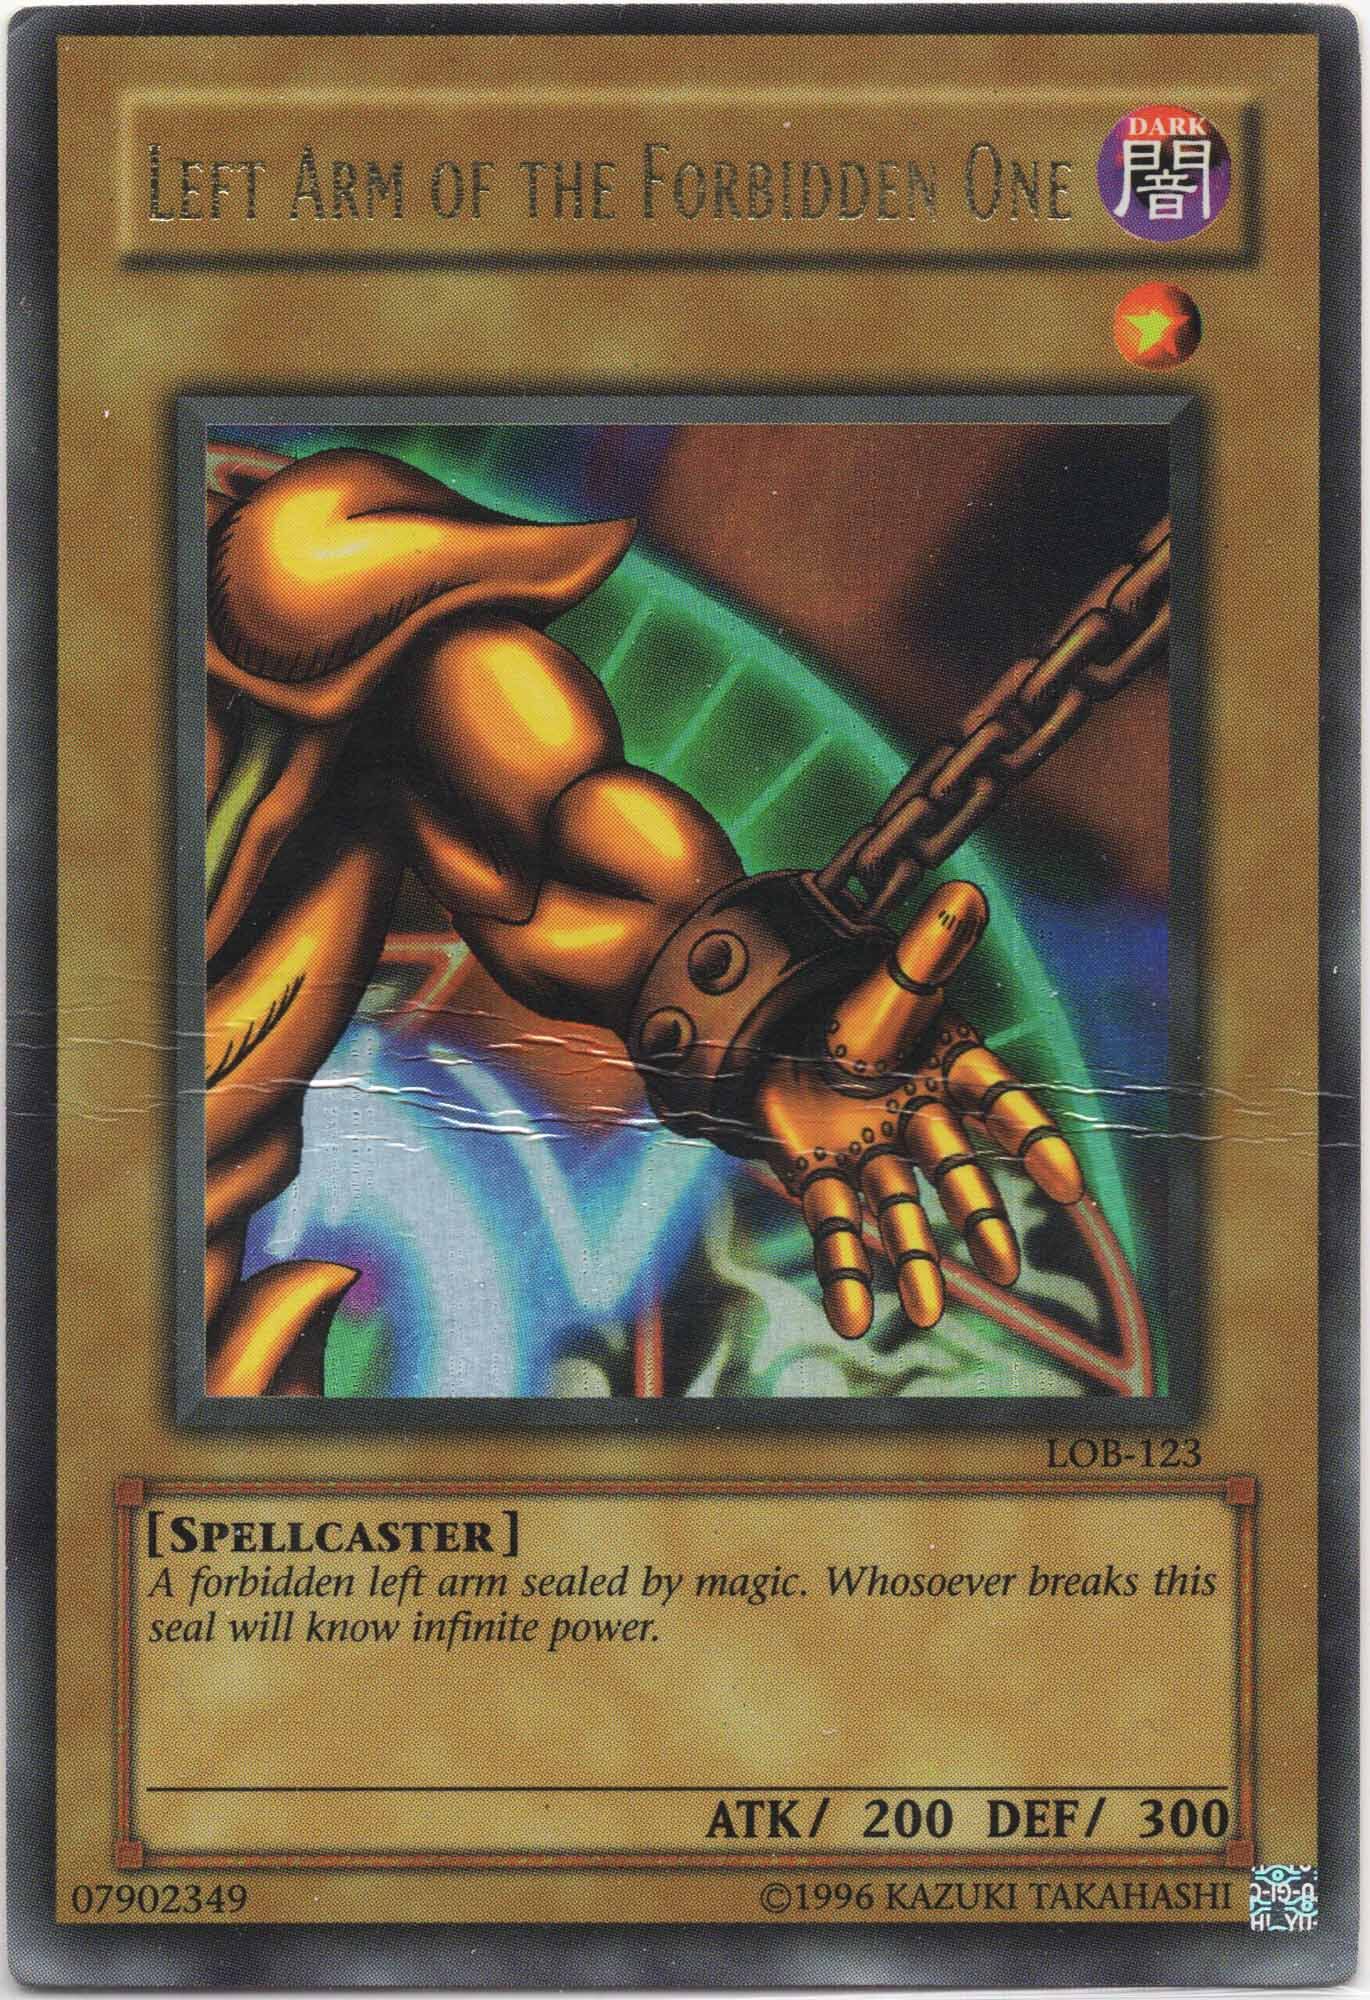 Left Arm of the Forbidden One - LOB-123 - Ultra Rare - Heavily Played